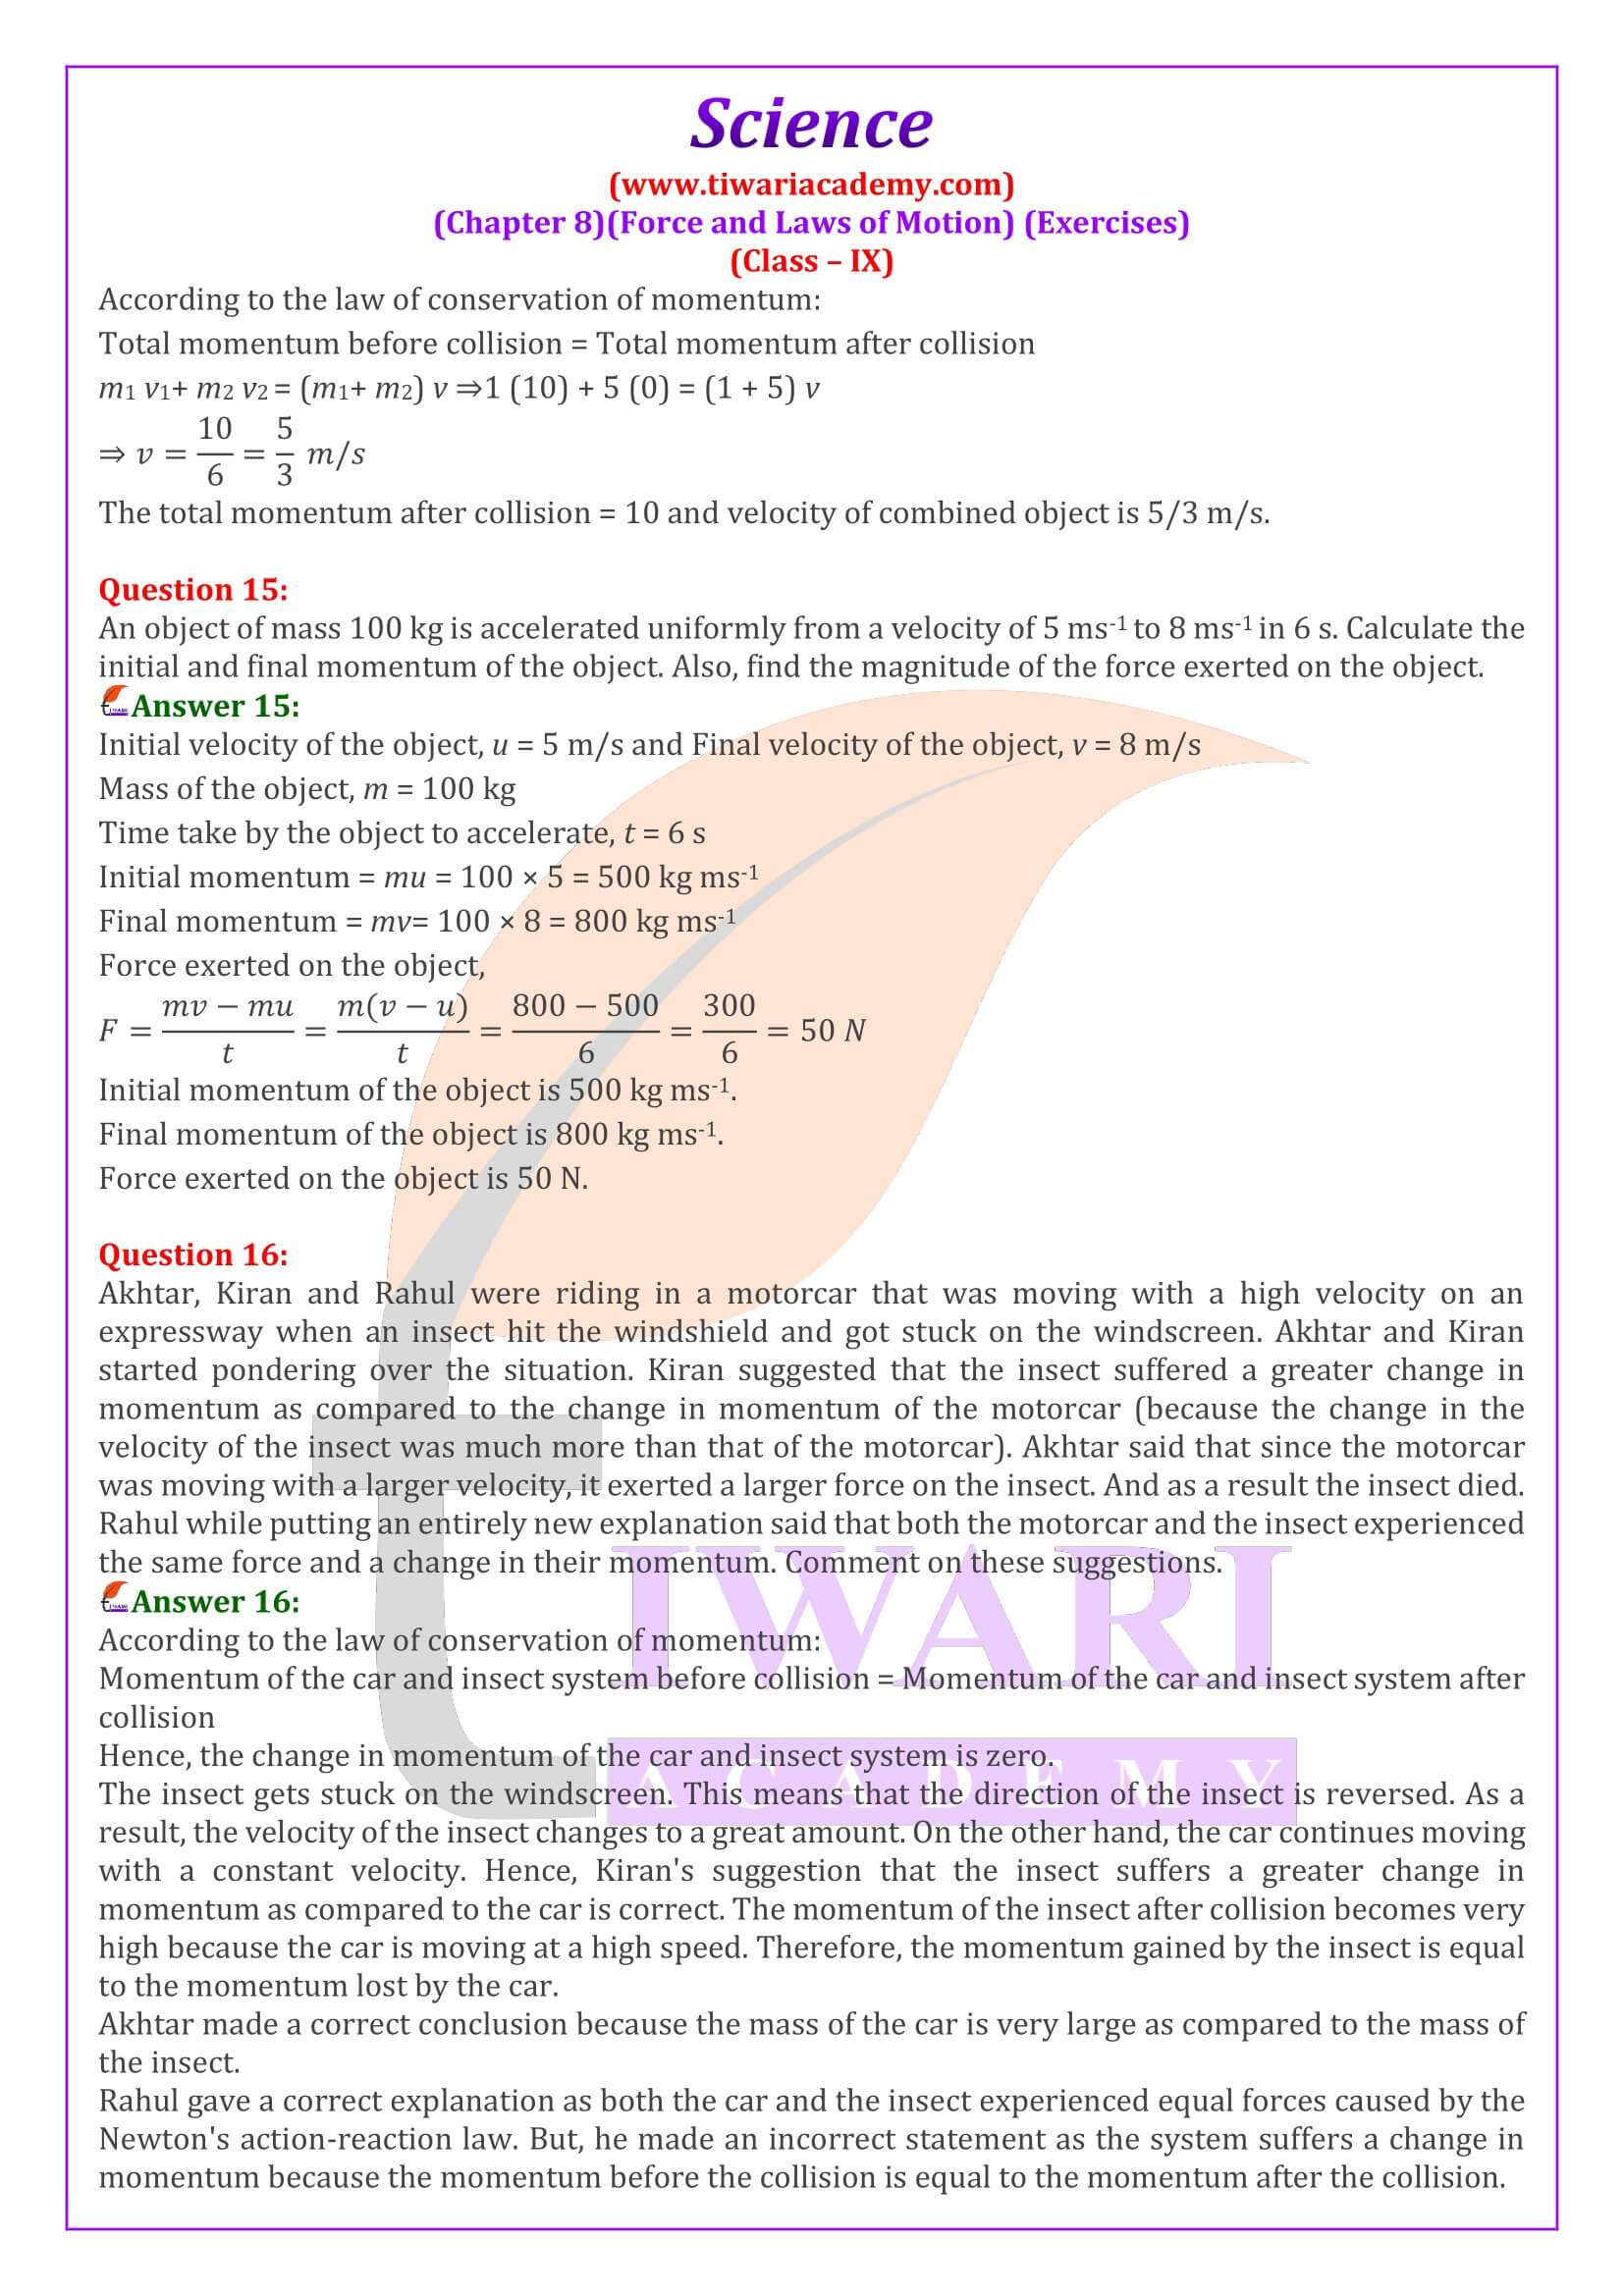 NCERT Solutions for Class 9 Science Chapter 8 in English Medium